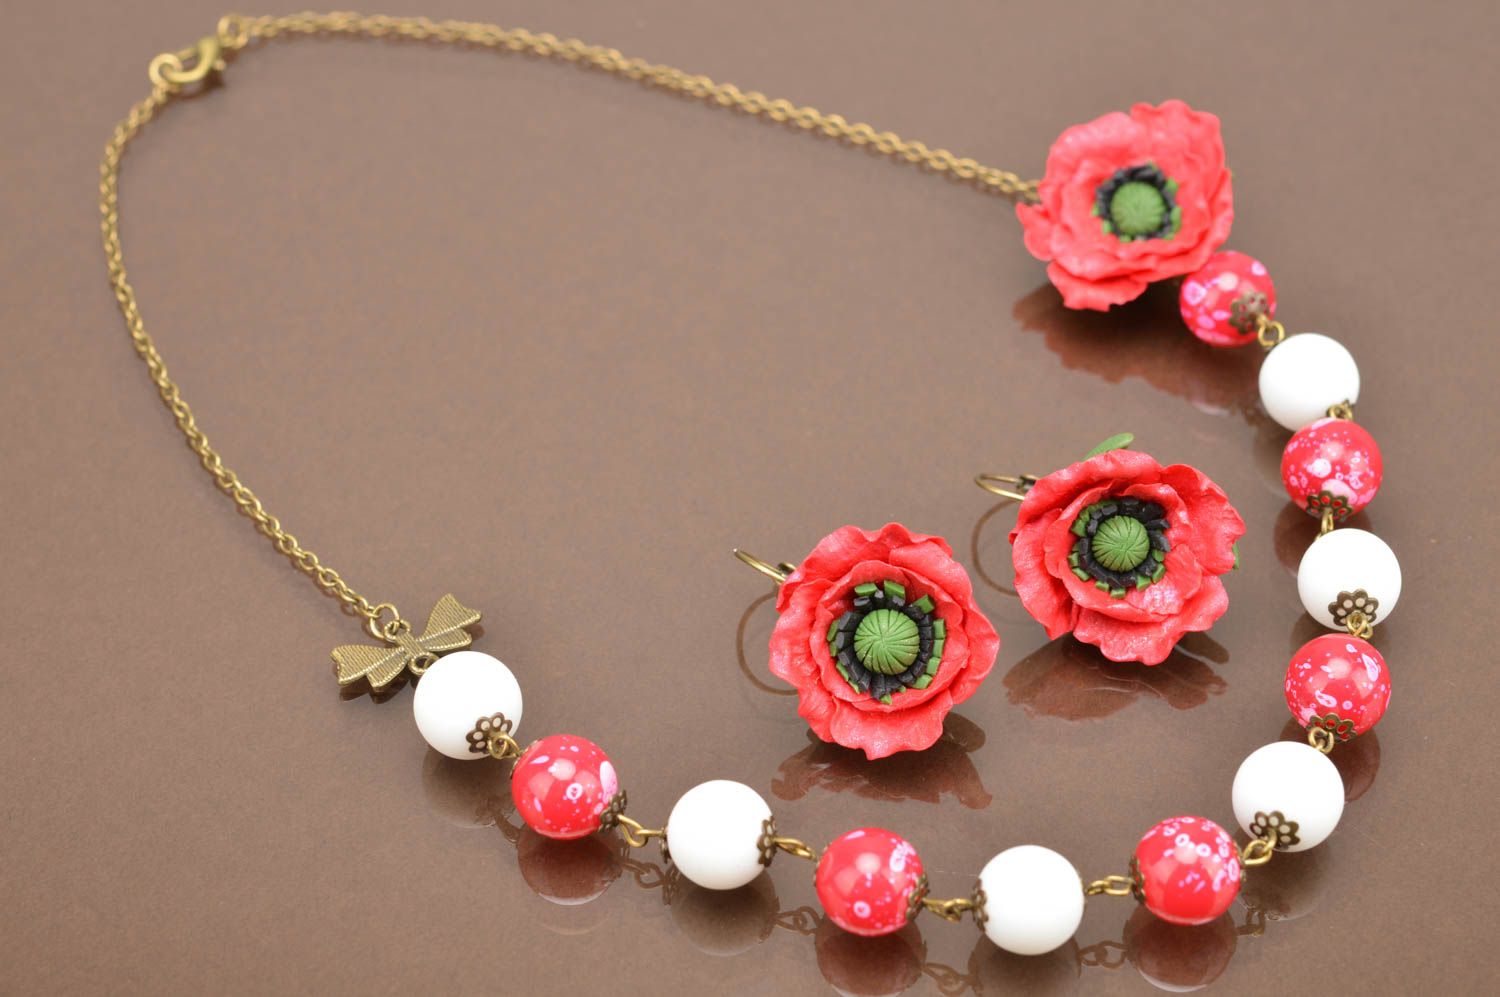 Handmade floral polymer clay jewelry set earrings and necklace with red poppies photo 2